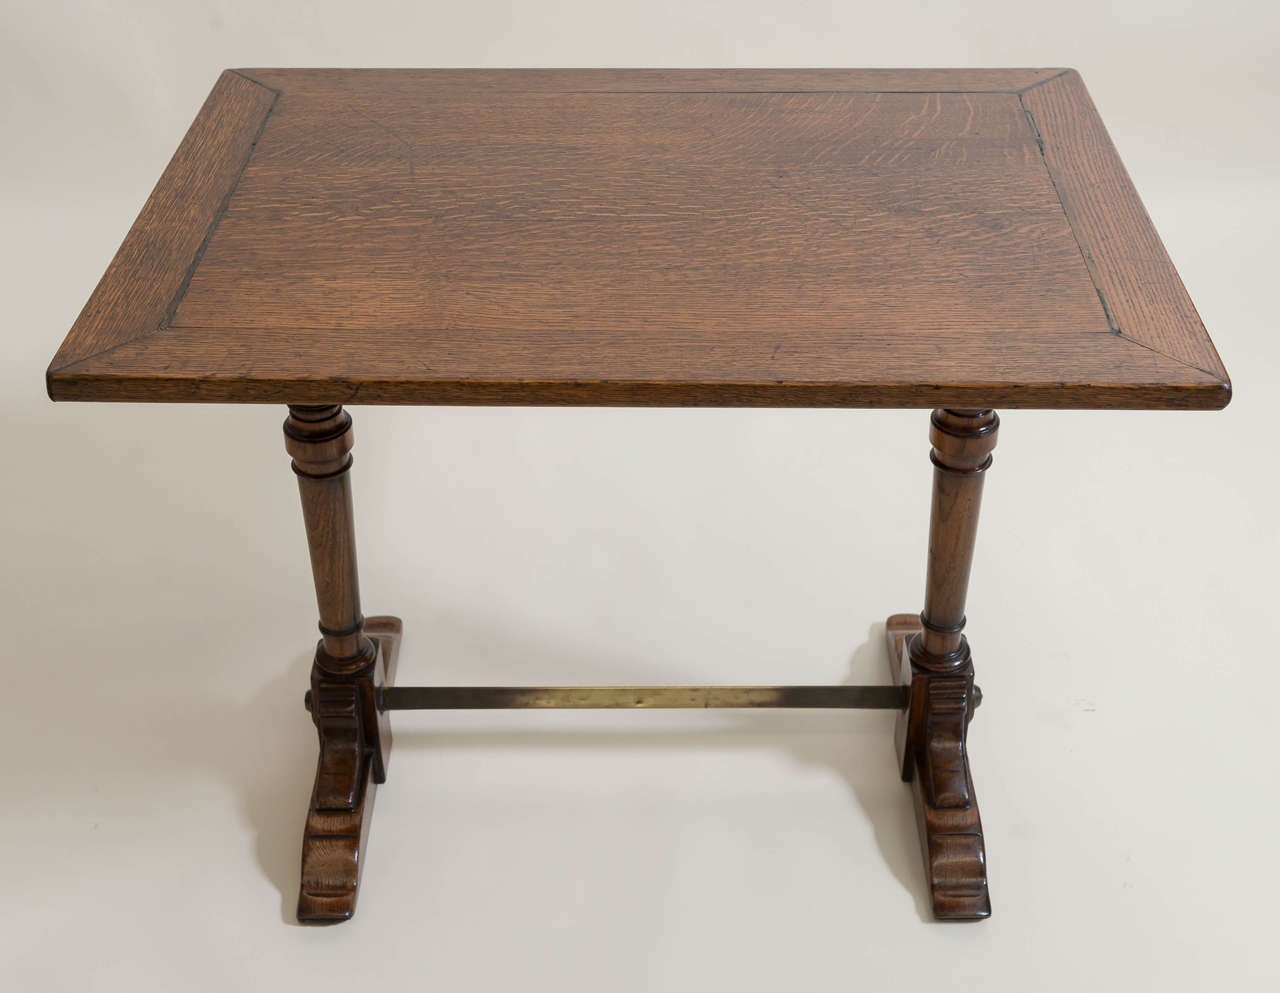 Late 19th c. English oak library /reading table of good scale. Good trestle design top resting on strong sled feet. Brass stretcher foot rest. Very sturdy. Circa 1890.